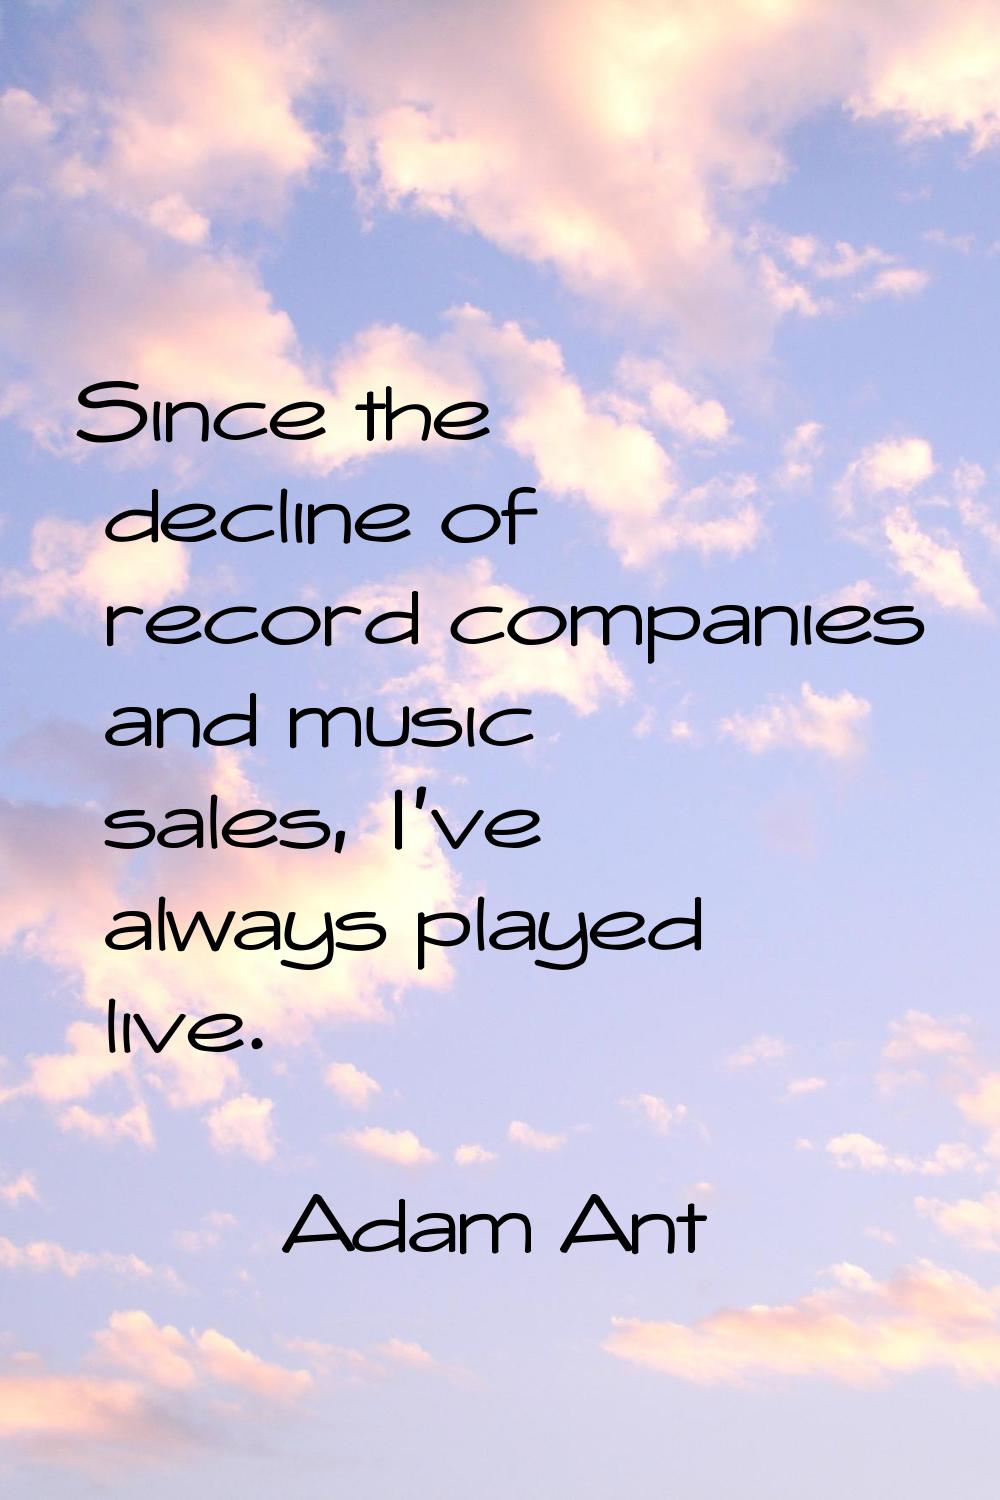 Since the decline of record companies and music sales, I've always played live.